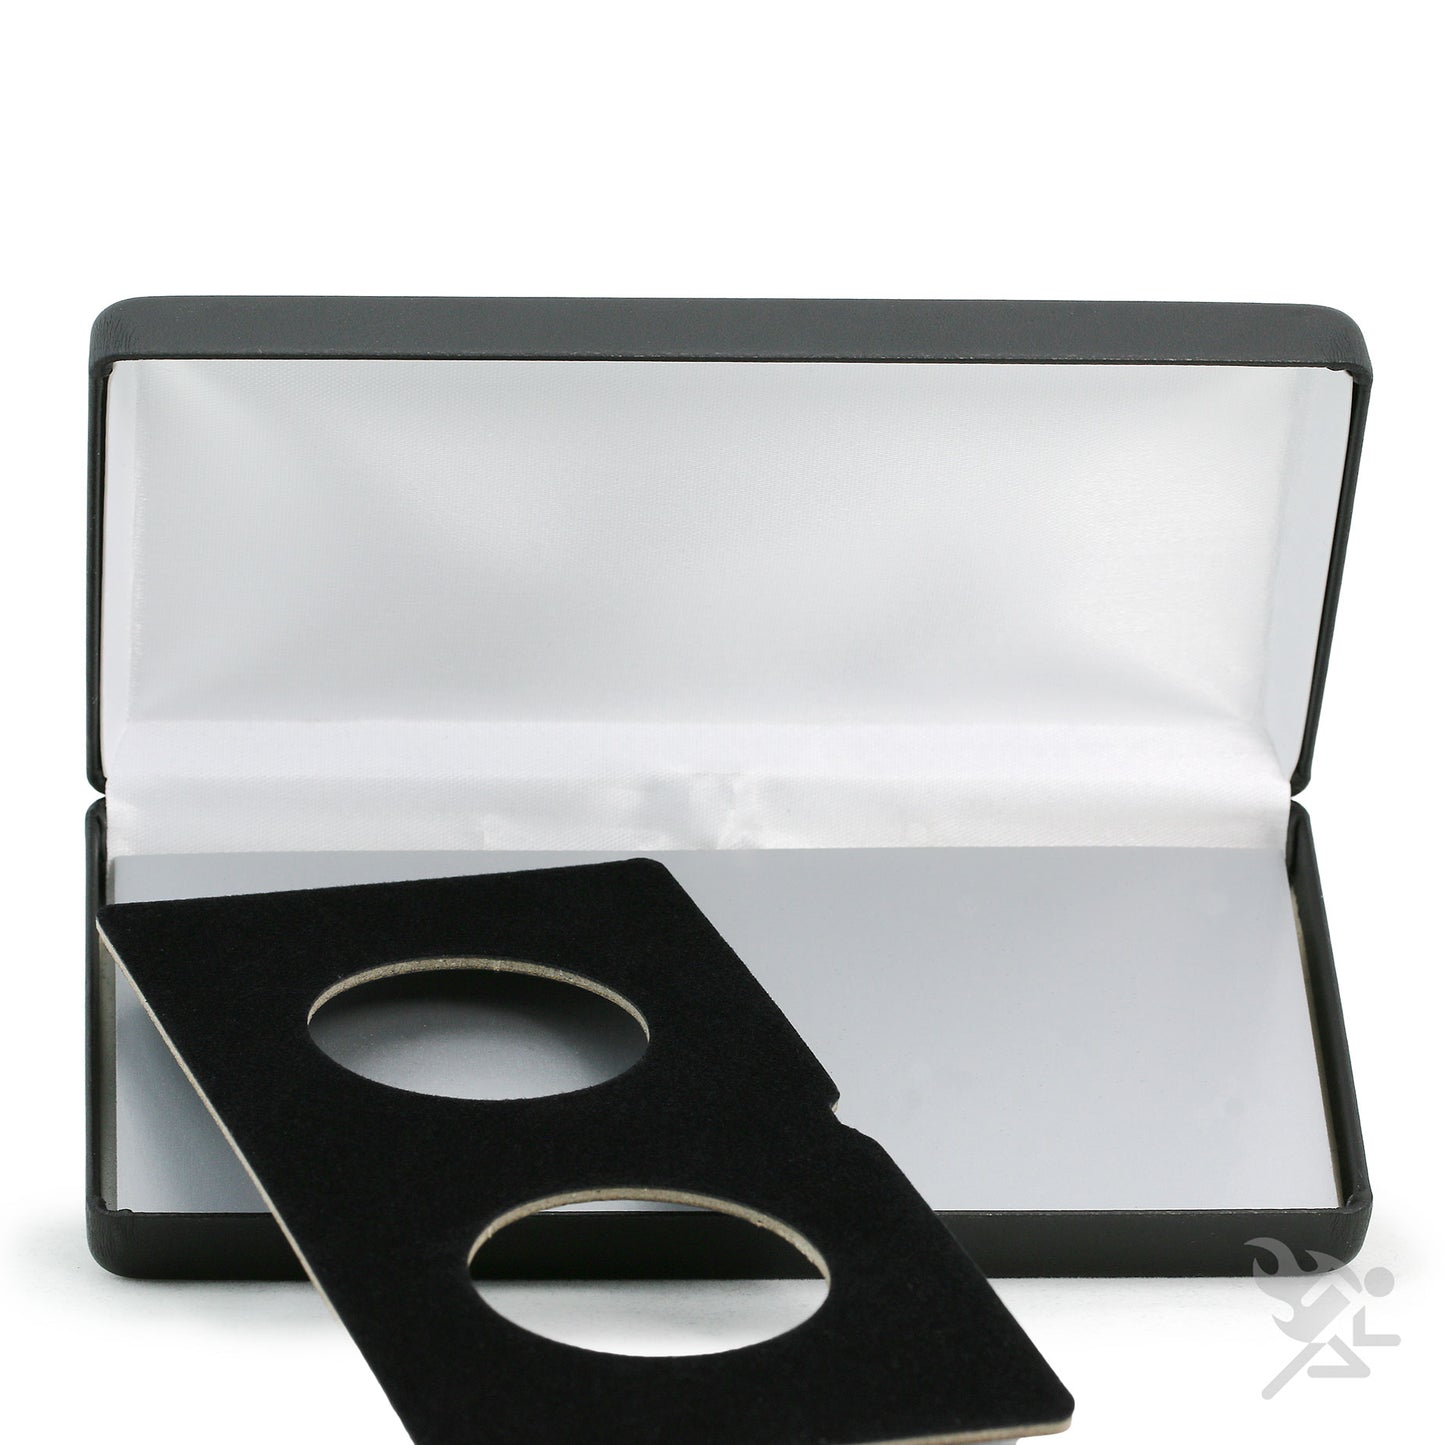 Double Coin Display Box for AirTite LRG - Model "H" Coin Holders